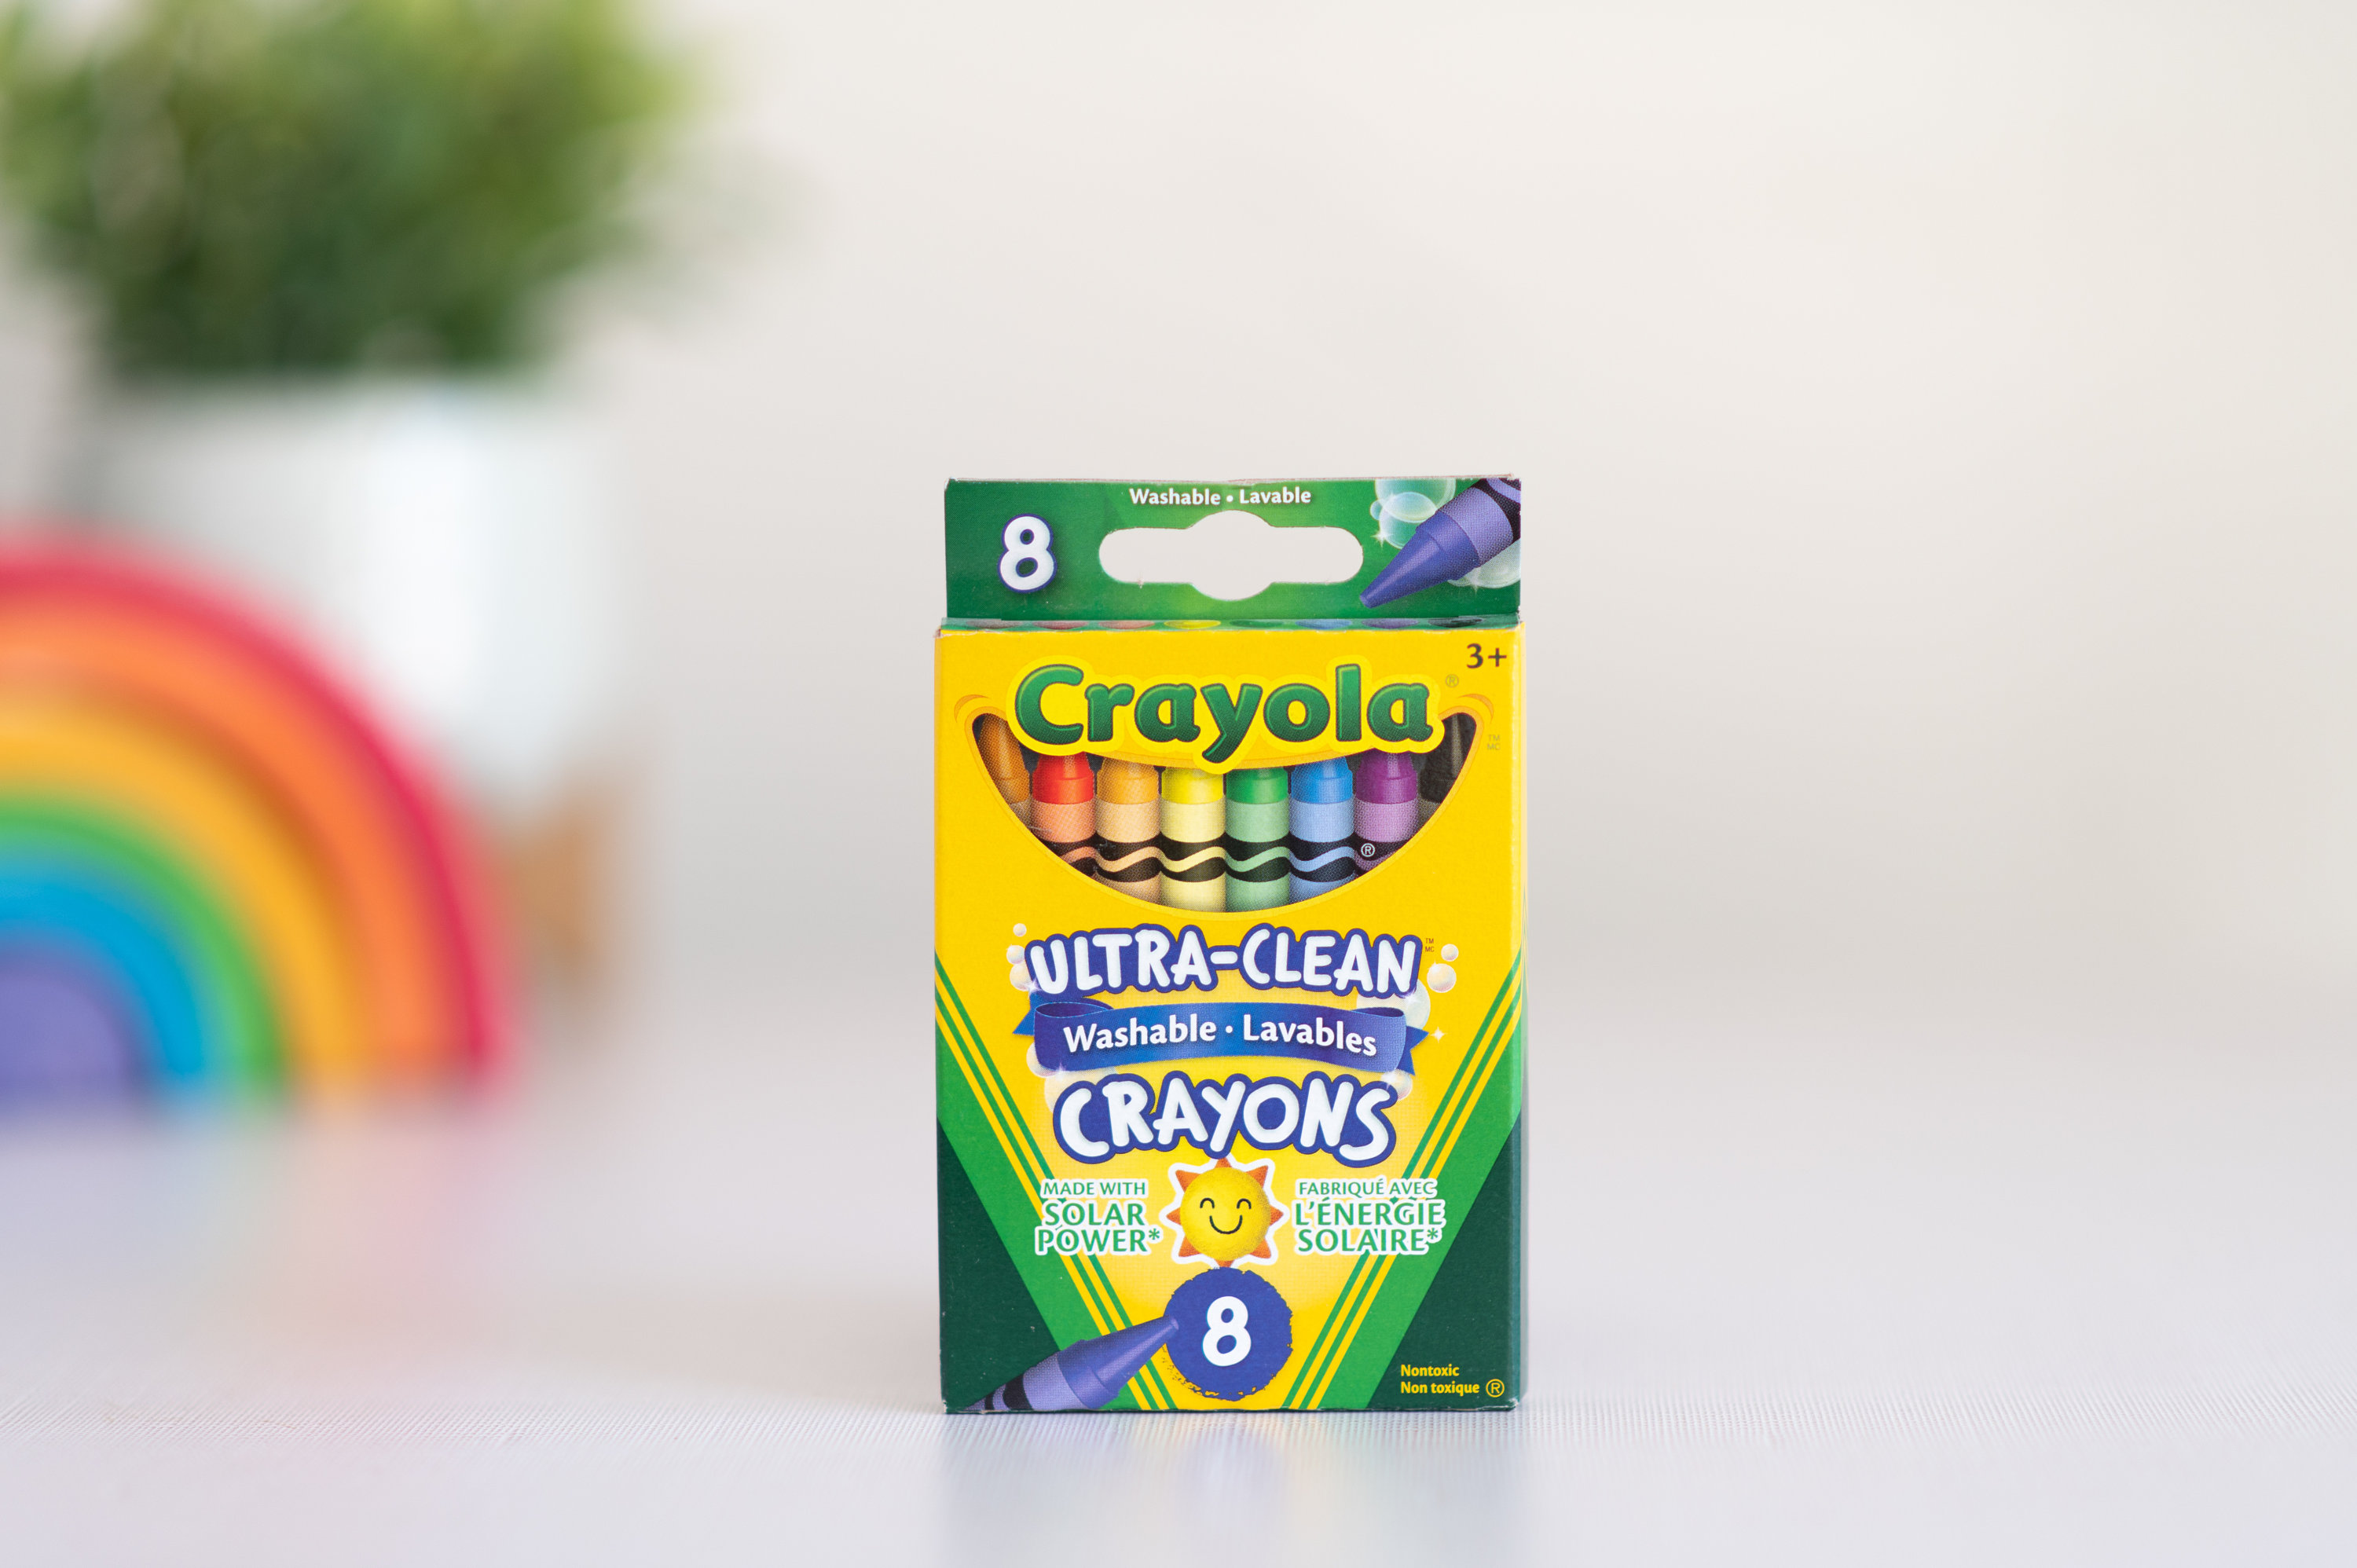 Crayola 8 Washable Crayons, Set of Crayons, Fine Line, Washable, Non Toxic,  Gift for Boys Girls, Arts and Crafts, Gifting, Stocking Stuffer 